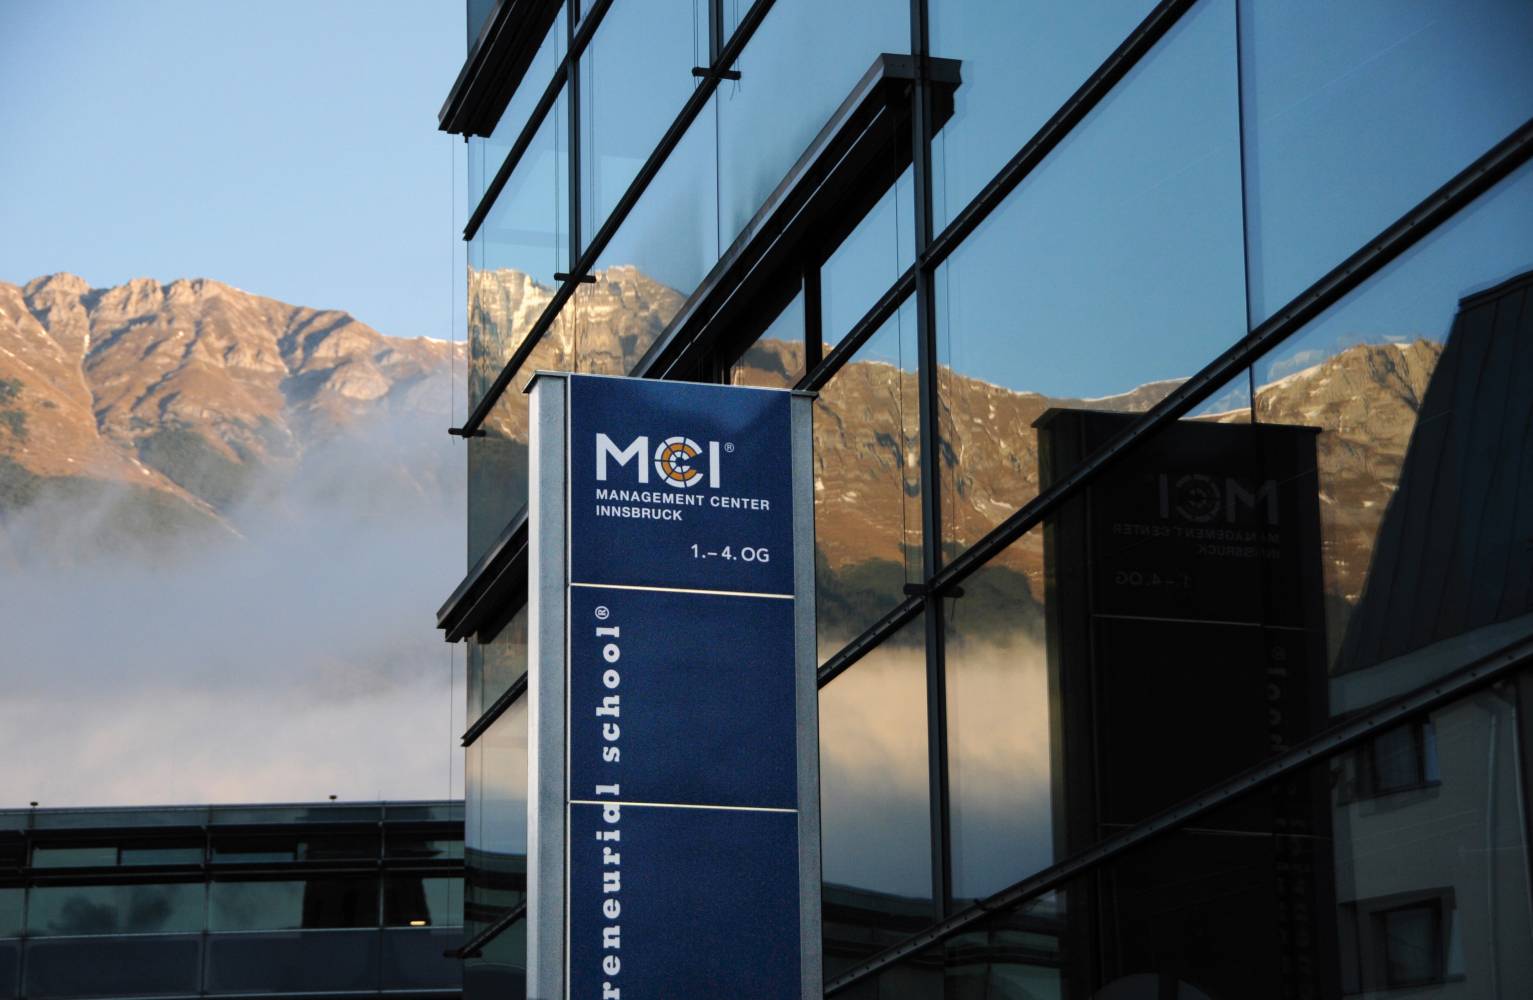 The planning of the new MCI Campus in Innsbruck has entered the next round. ©MCI